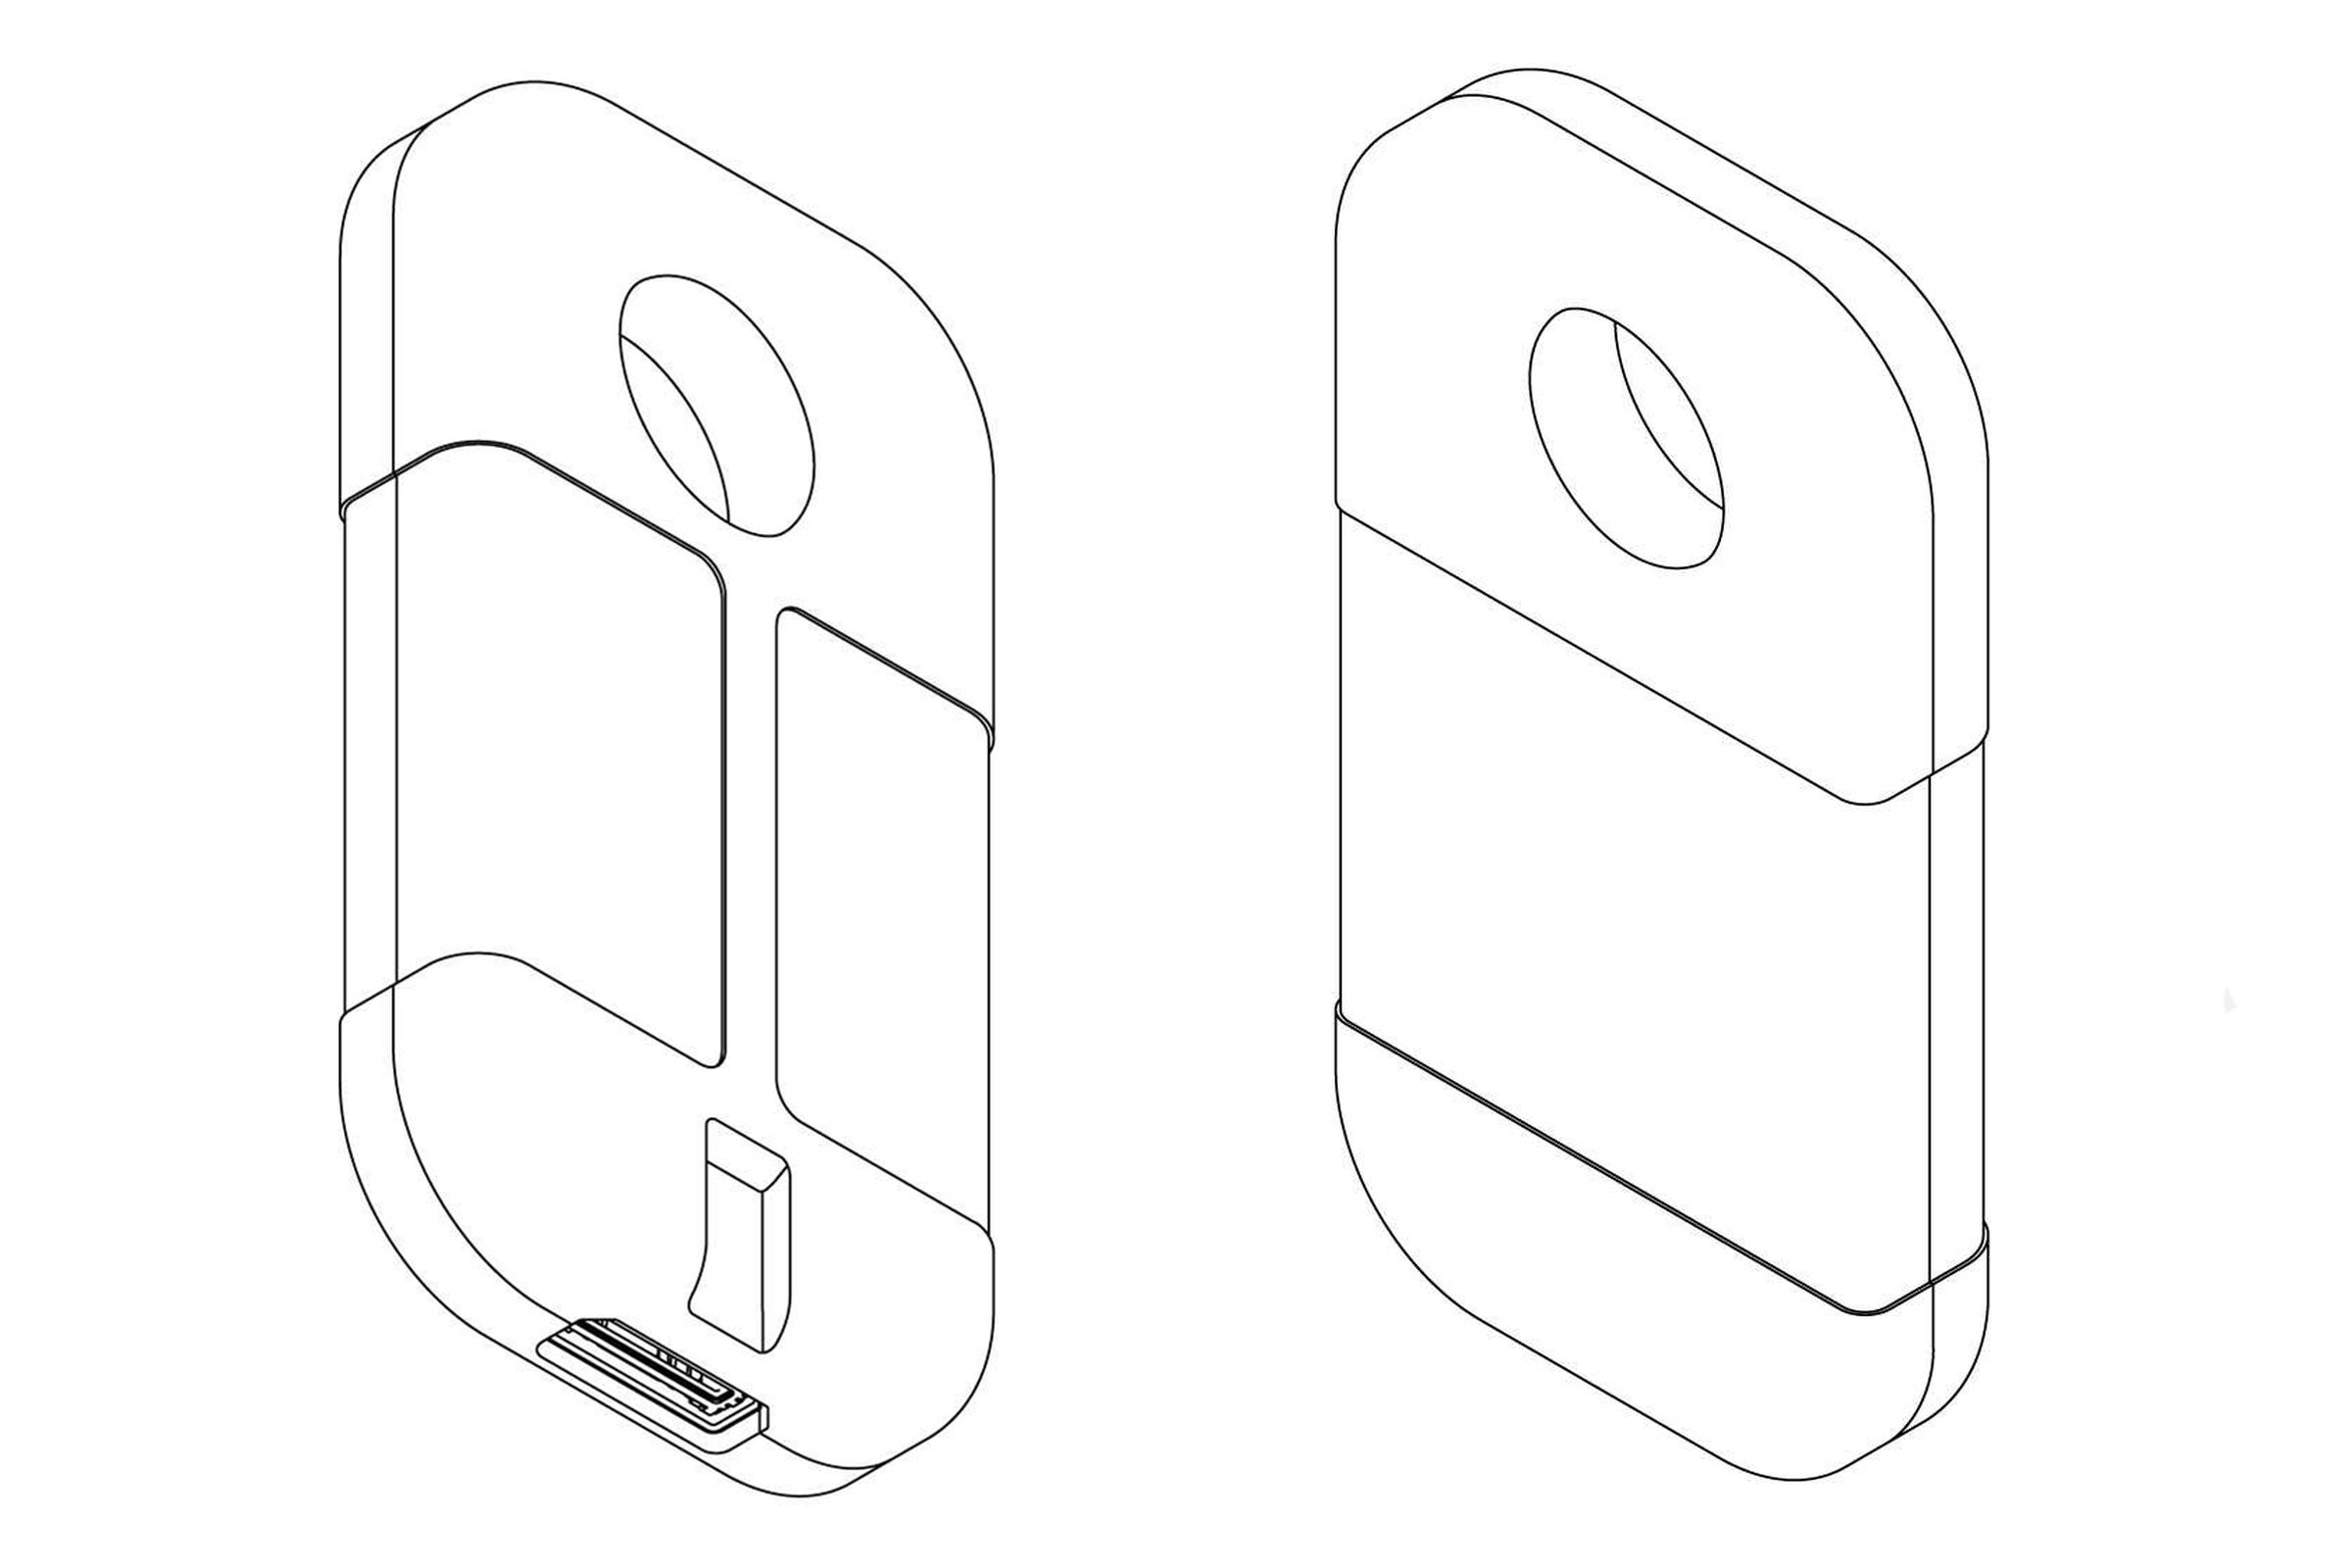 Two illustrations from the Sony Game Cartridge design patent.